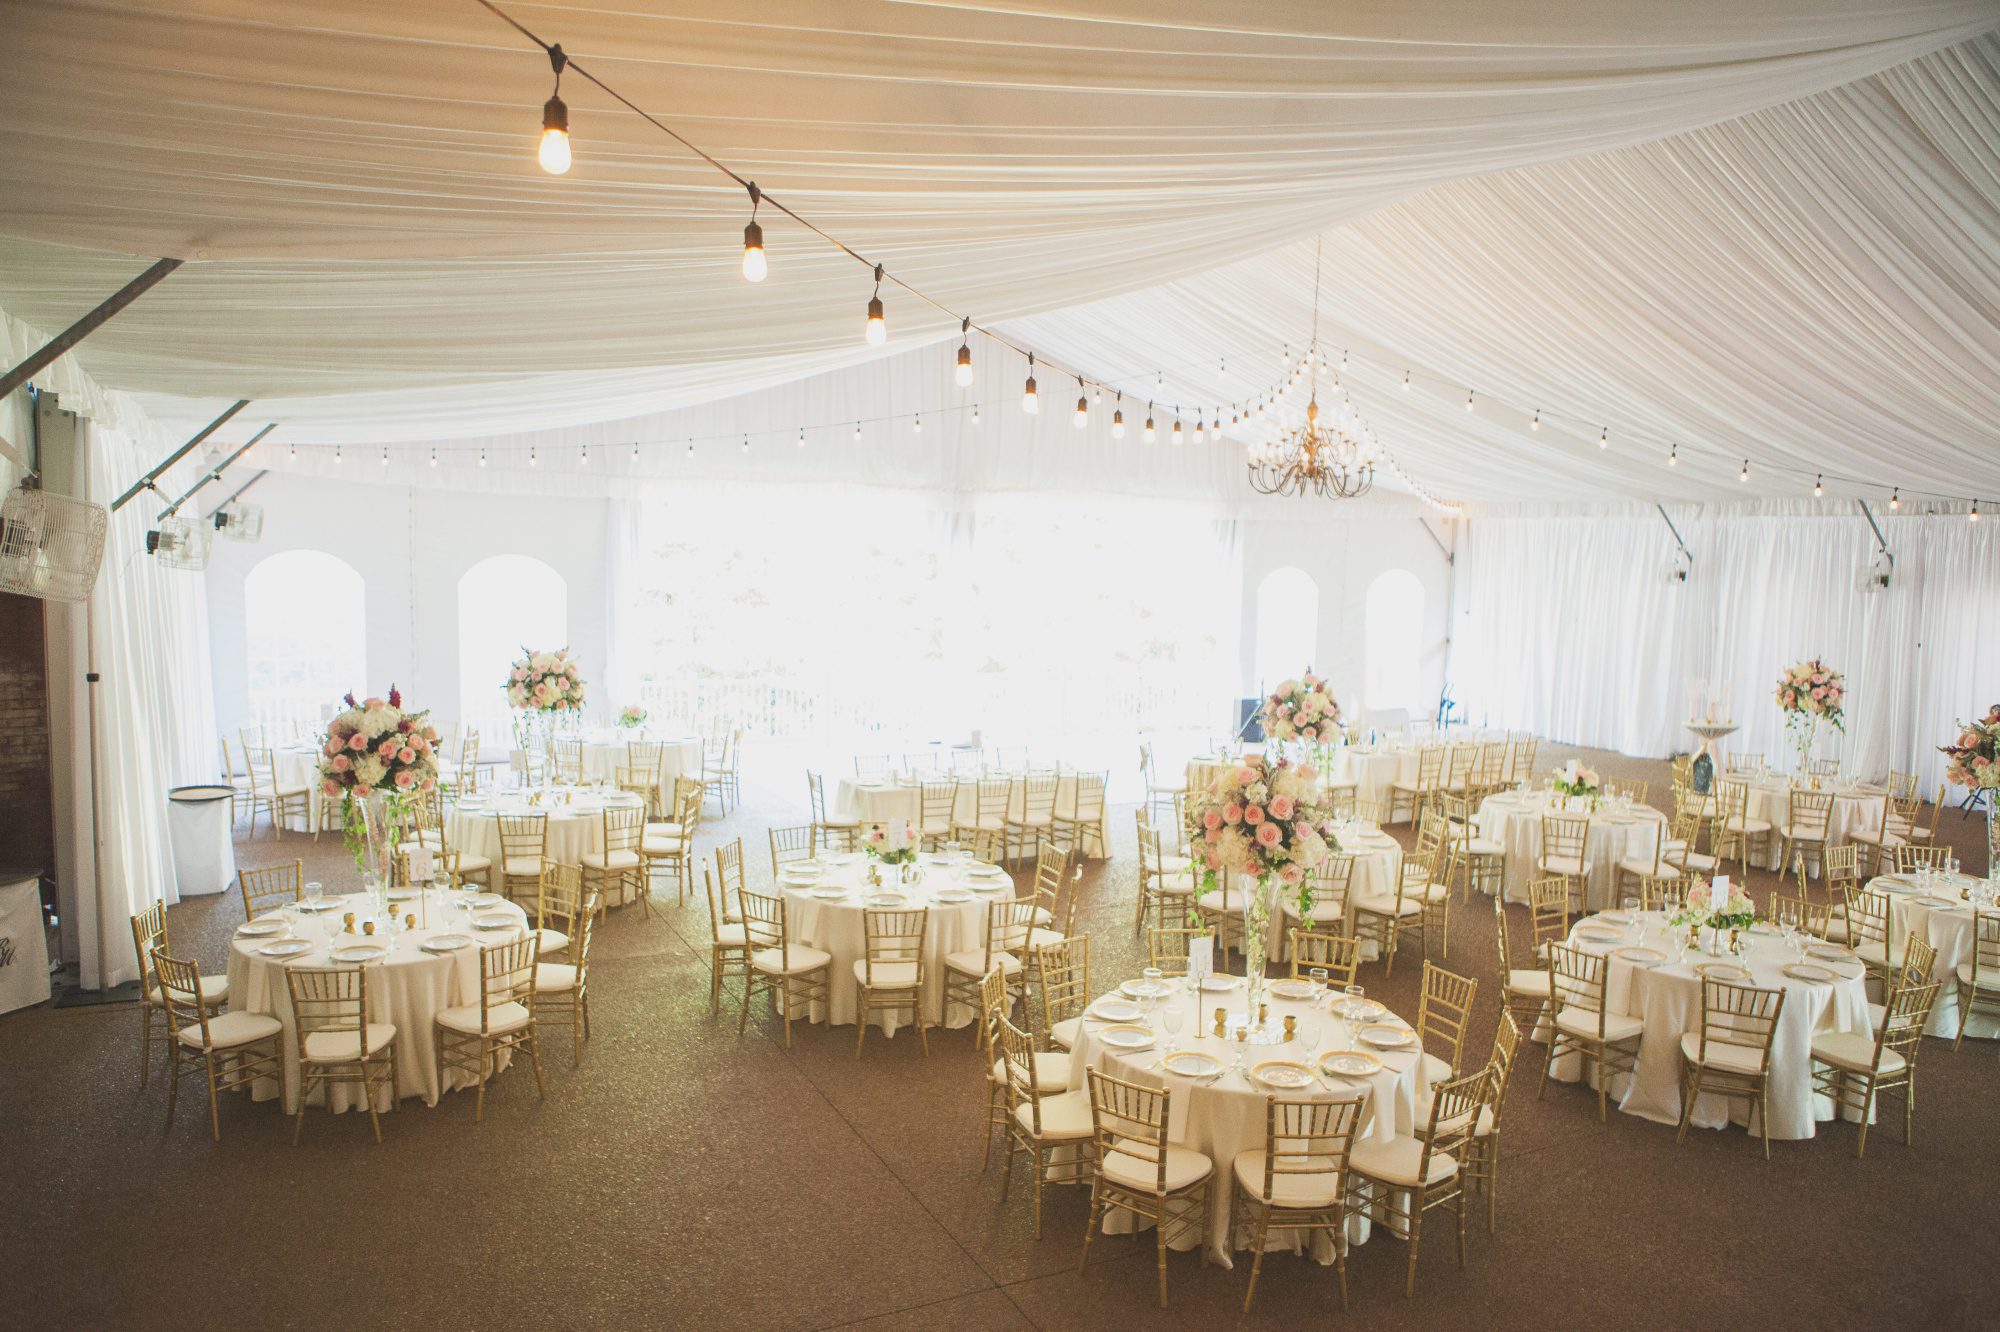 Tented reception hall behind venue at Riverwood Mansion in Nashville, Tennessee. Photography by Krista Lee.